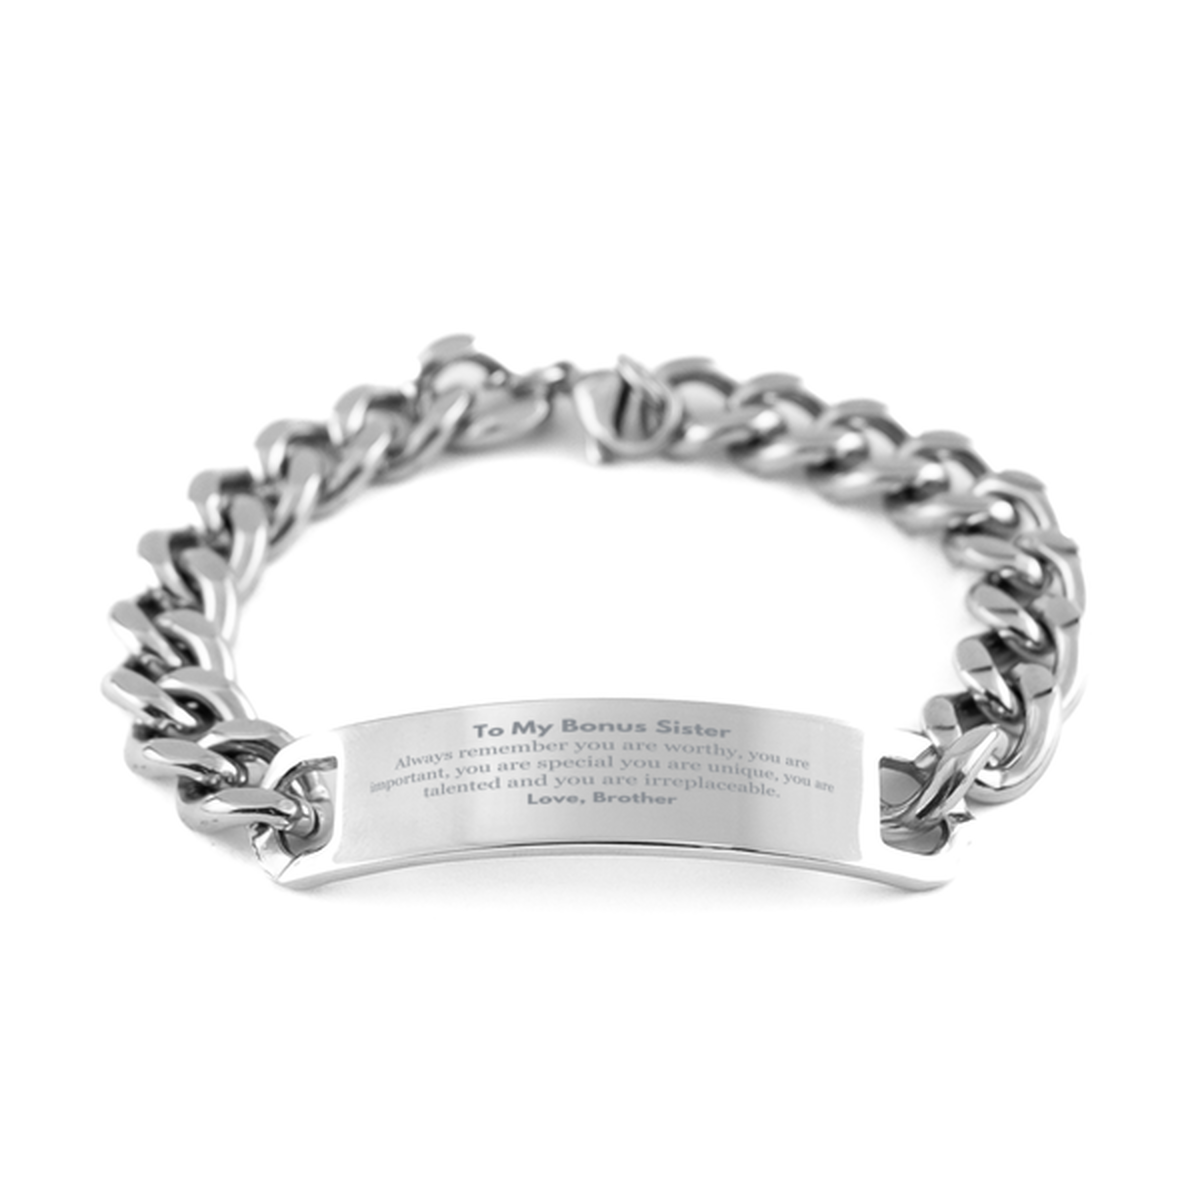 Bonus Sister Birthday Gifts from Brother, Inspirational Cuban Chain Stainless Steel Bracelet for Bonus Sister Christmas Graduation Gifts for Bonus Sister Always remember you are worthy, you are important. Love, Brother